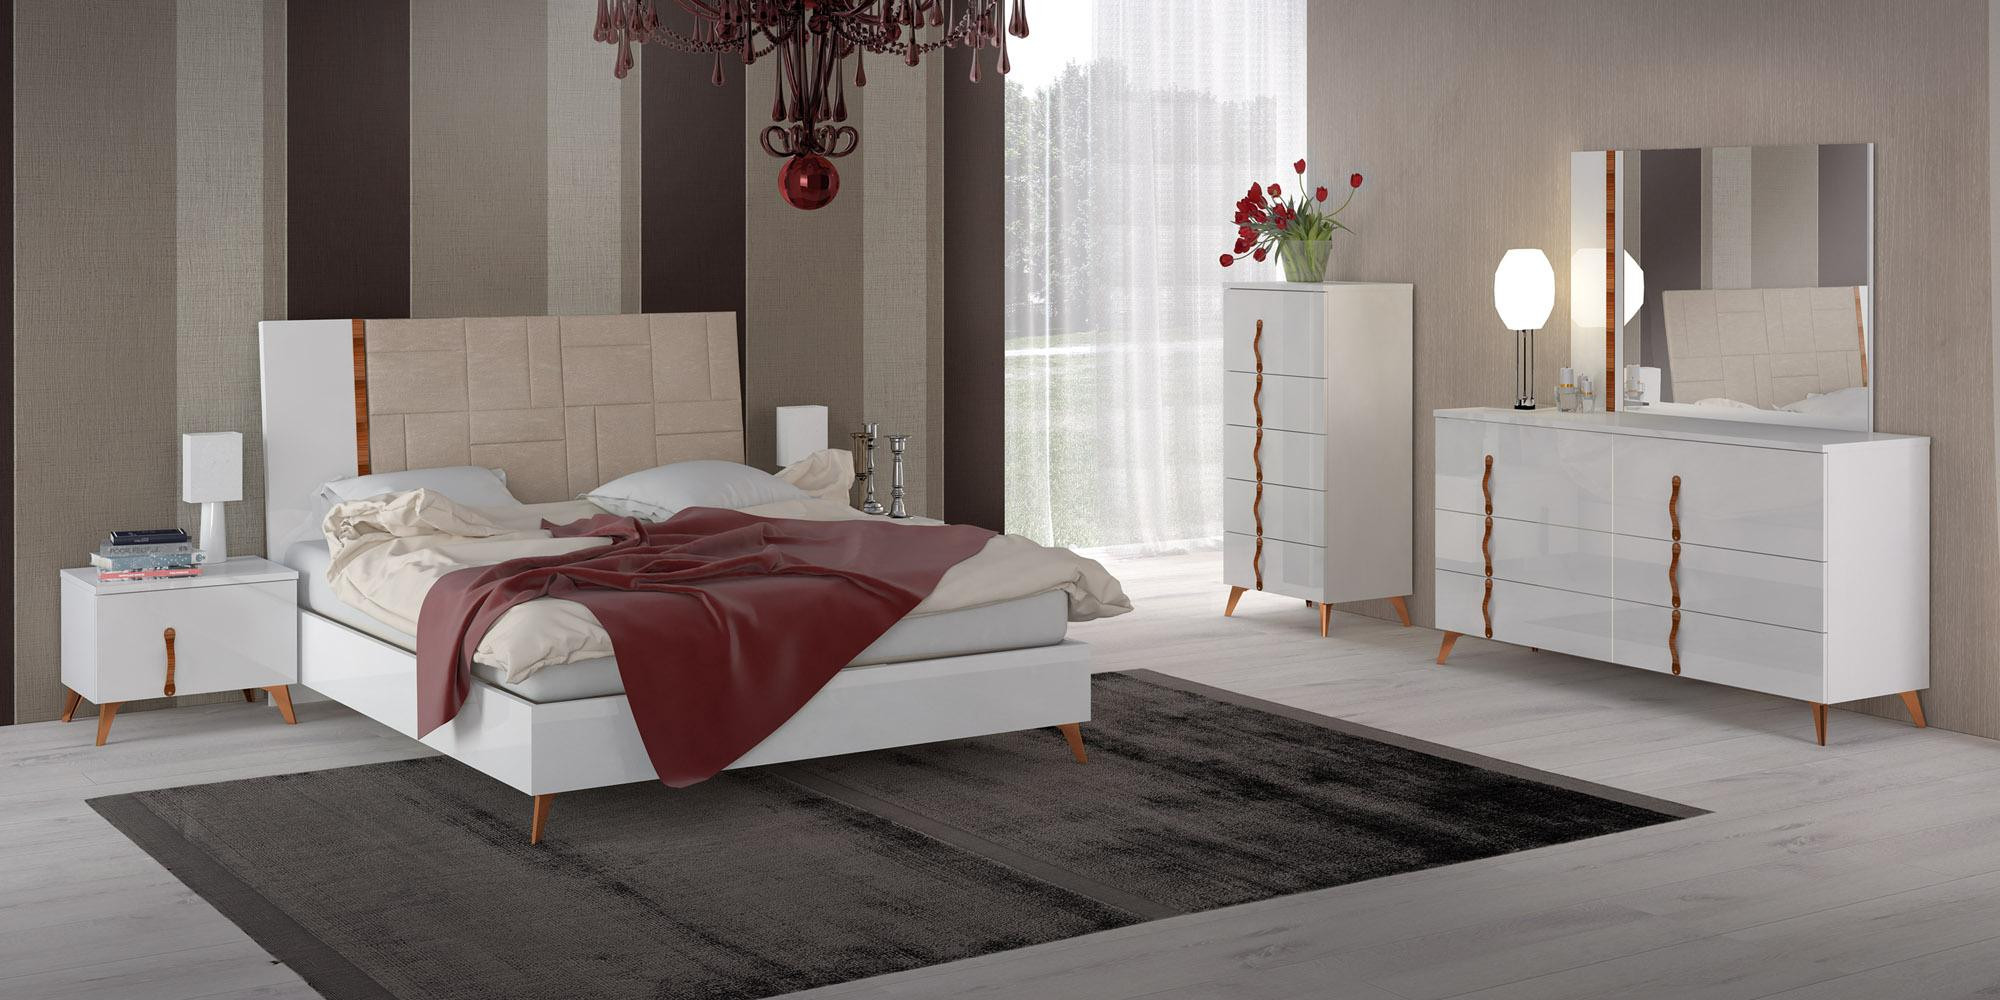 Bedroom Set Modern
 Made in Italy Leather Elite Modern Bedroom Sets with Extra